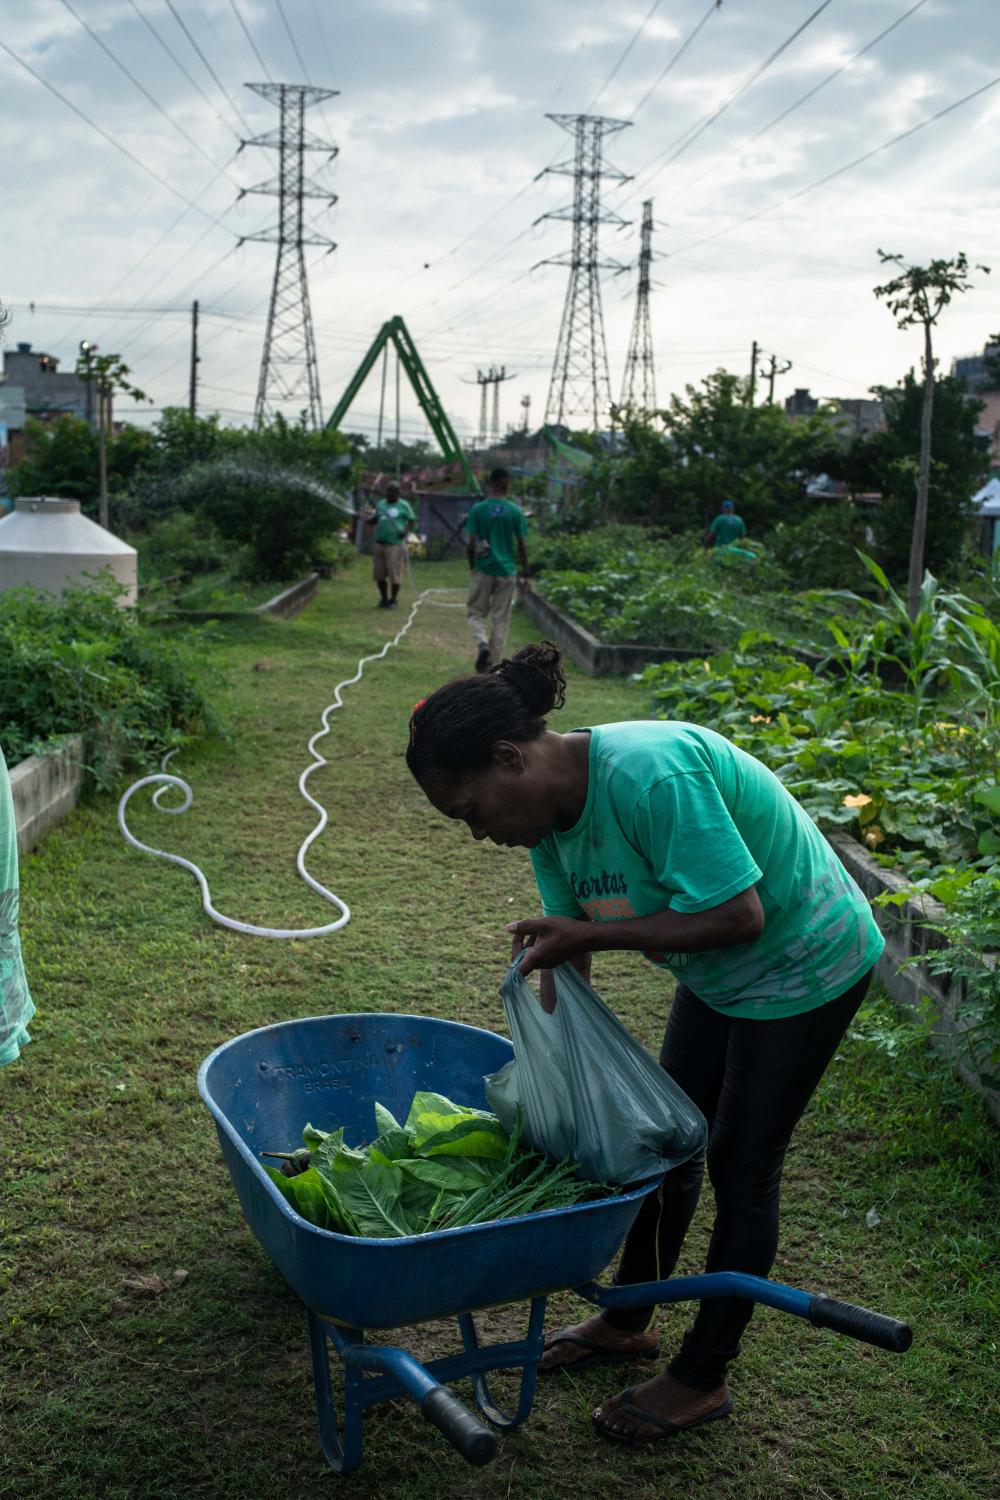 Urban farming in Brazil's favelas: this garden saves lives - Rose Rodrigues fills the pushcart from Manguinhos&rsquo; Urban Farm&rsquo;s vegetables to...